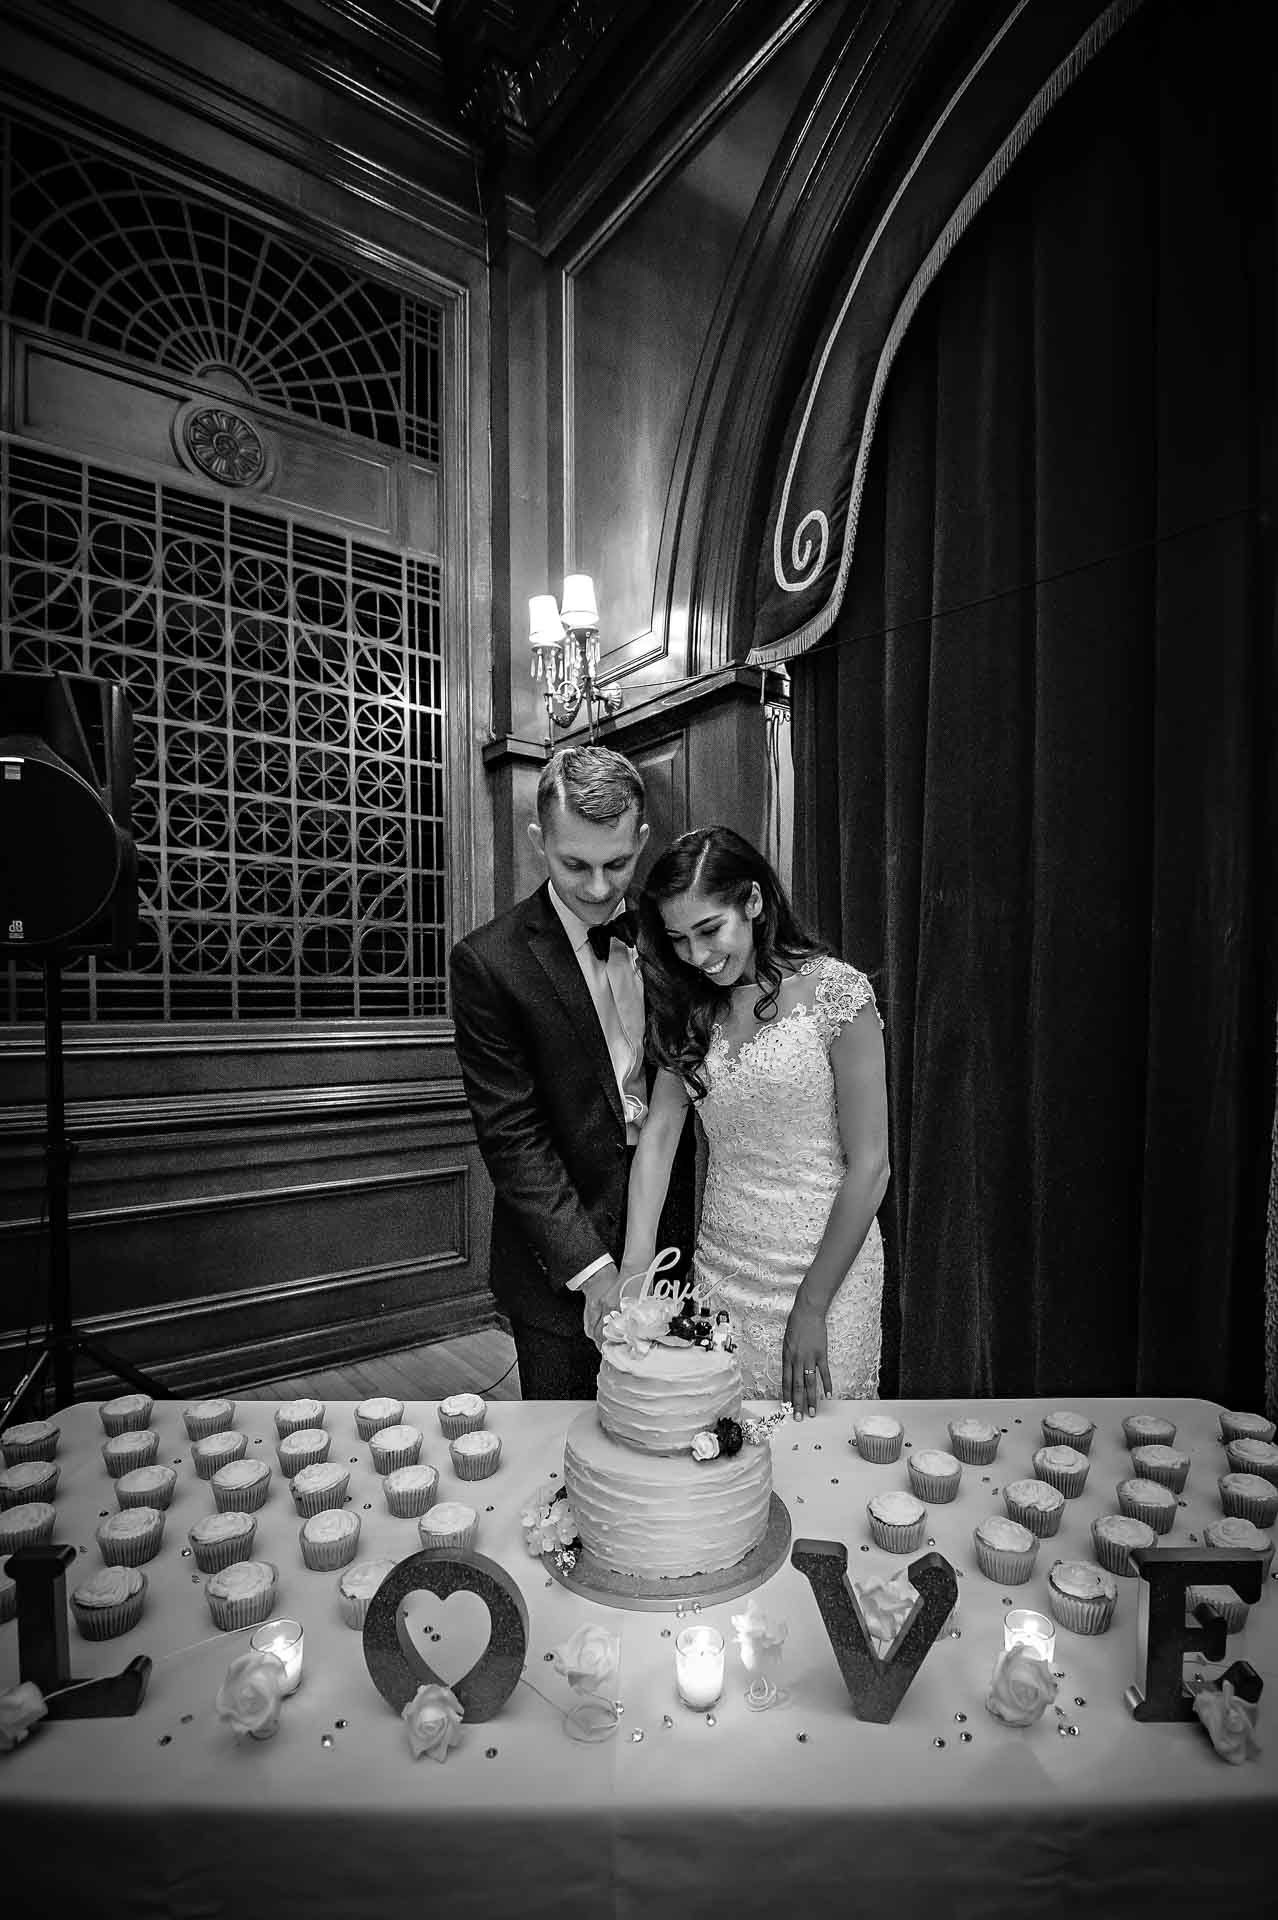 Black and white portrait of couple cutting cake behind 'Love' letters